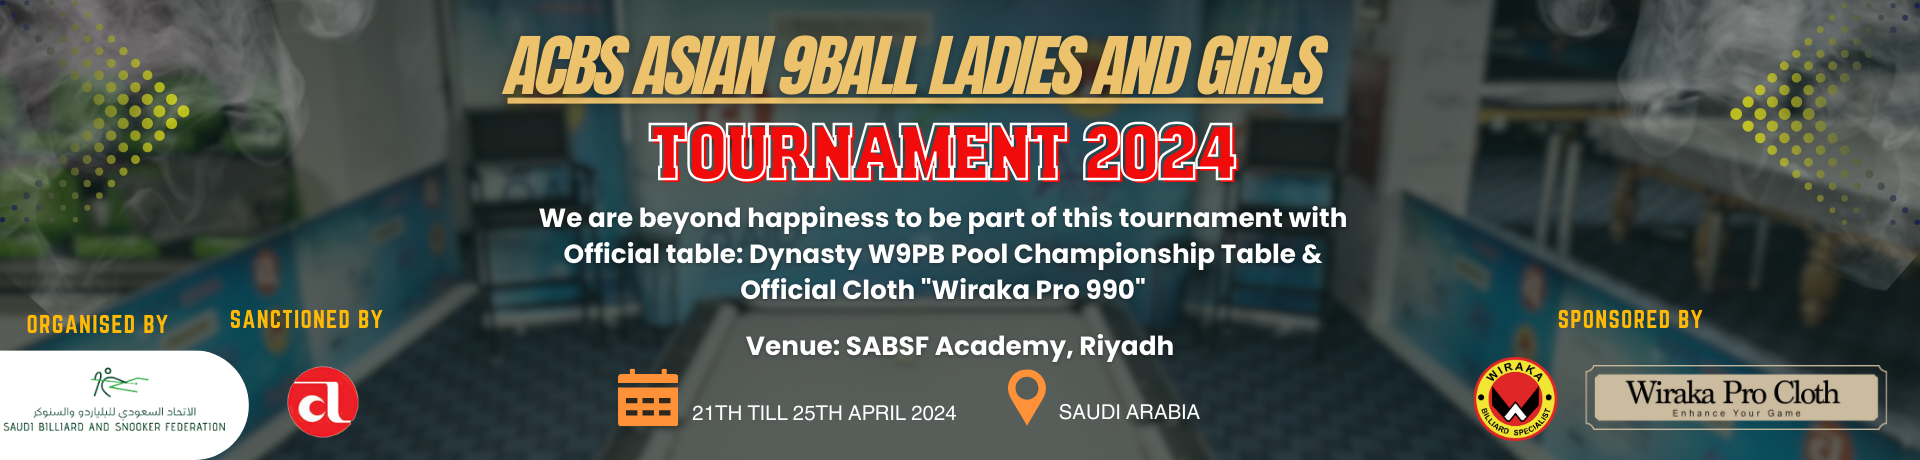 ACBS Asian 9Ball Ladies and Girls Tournament 2024 banner